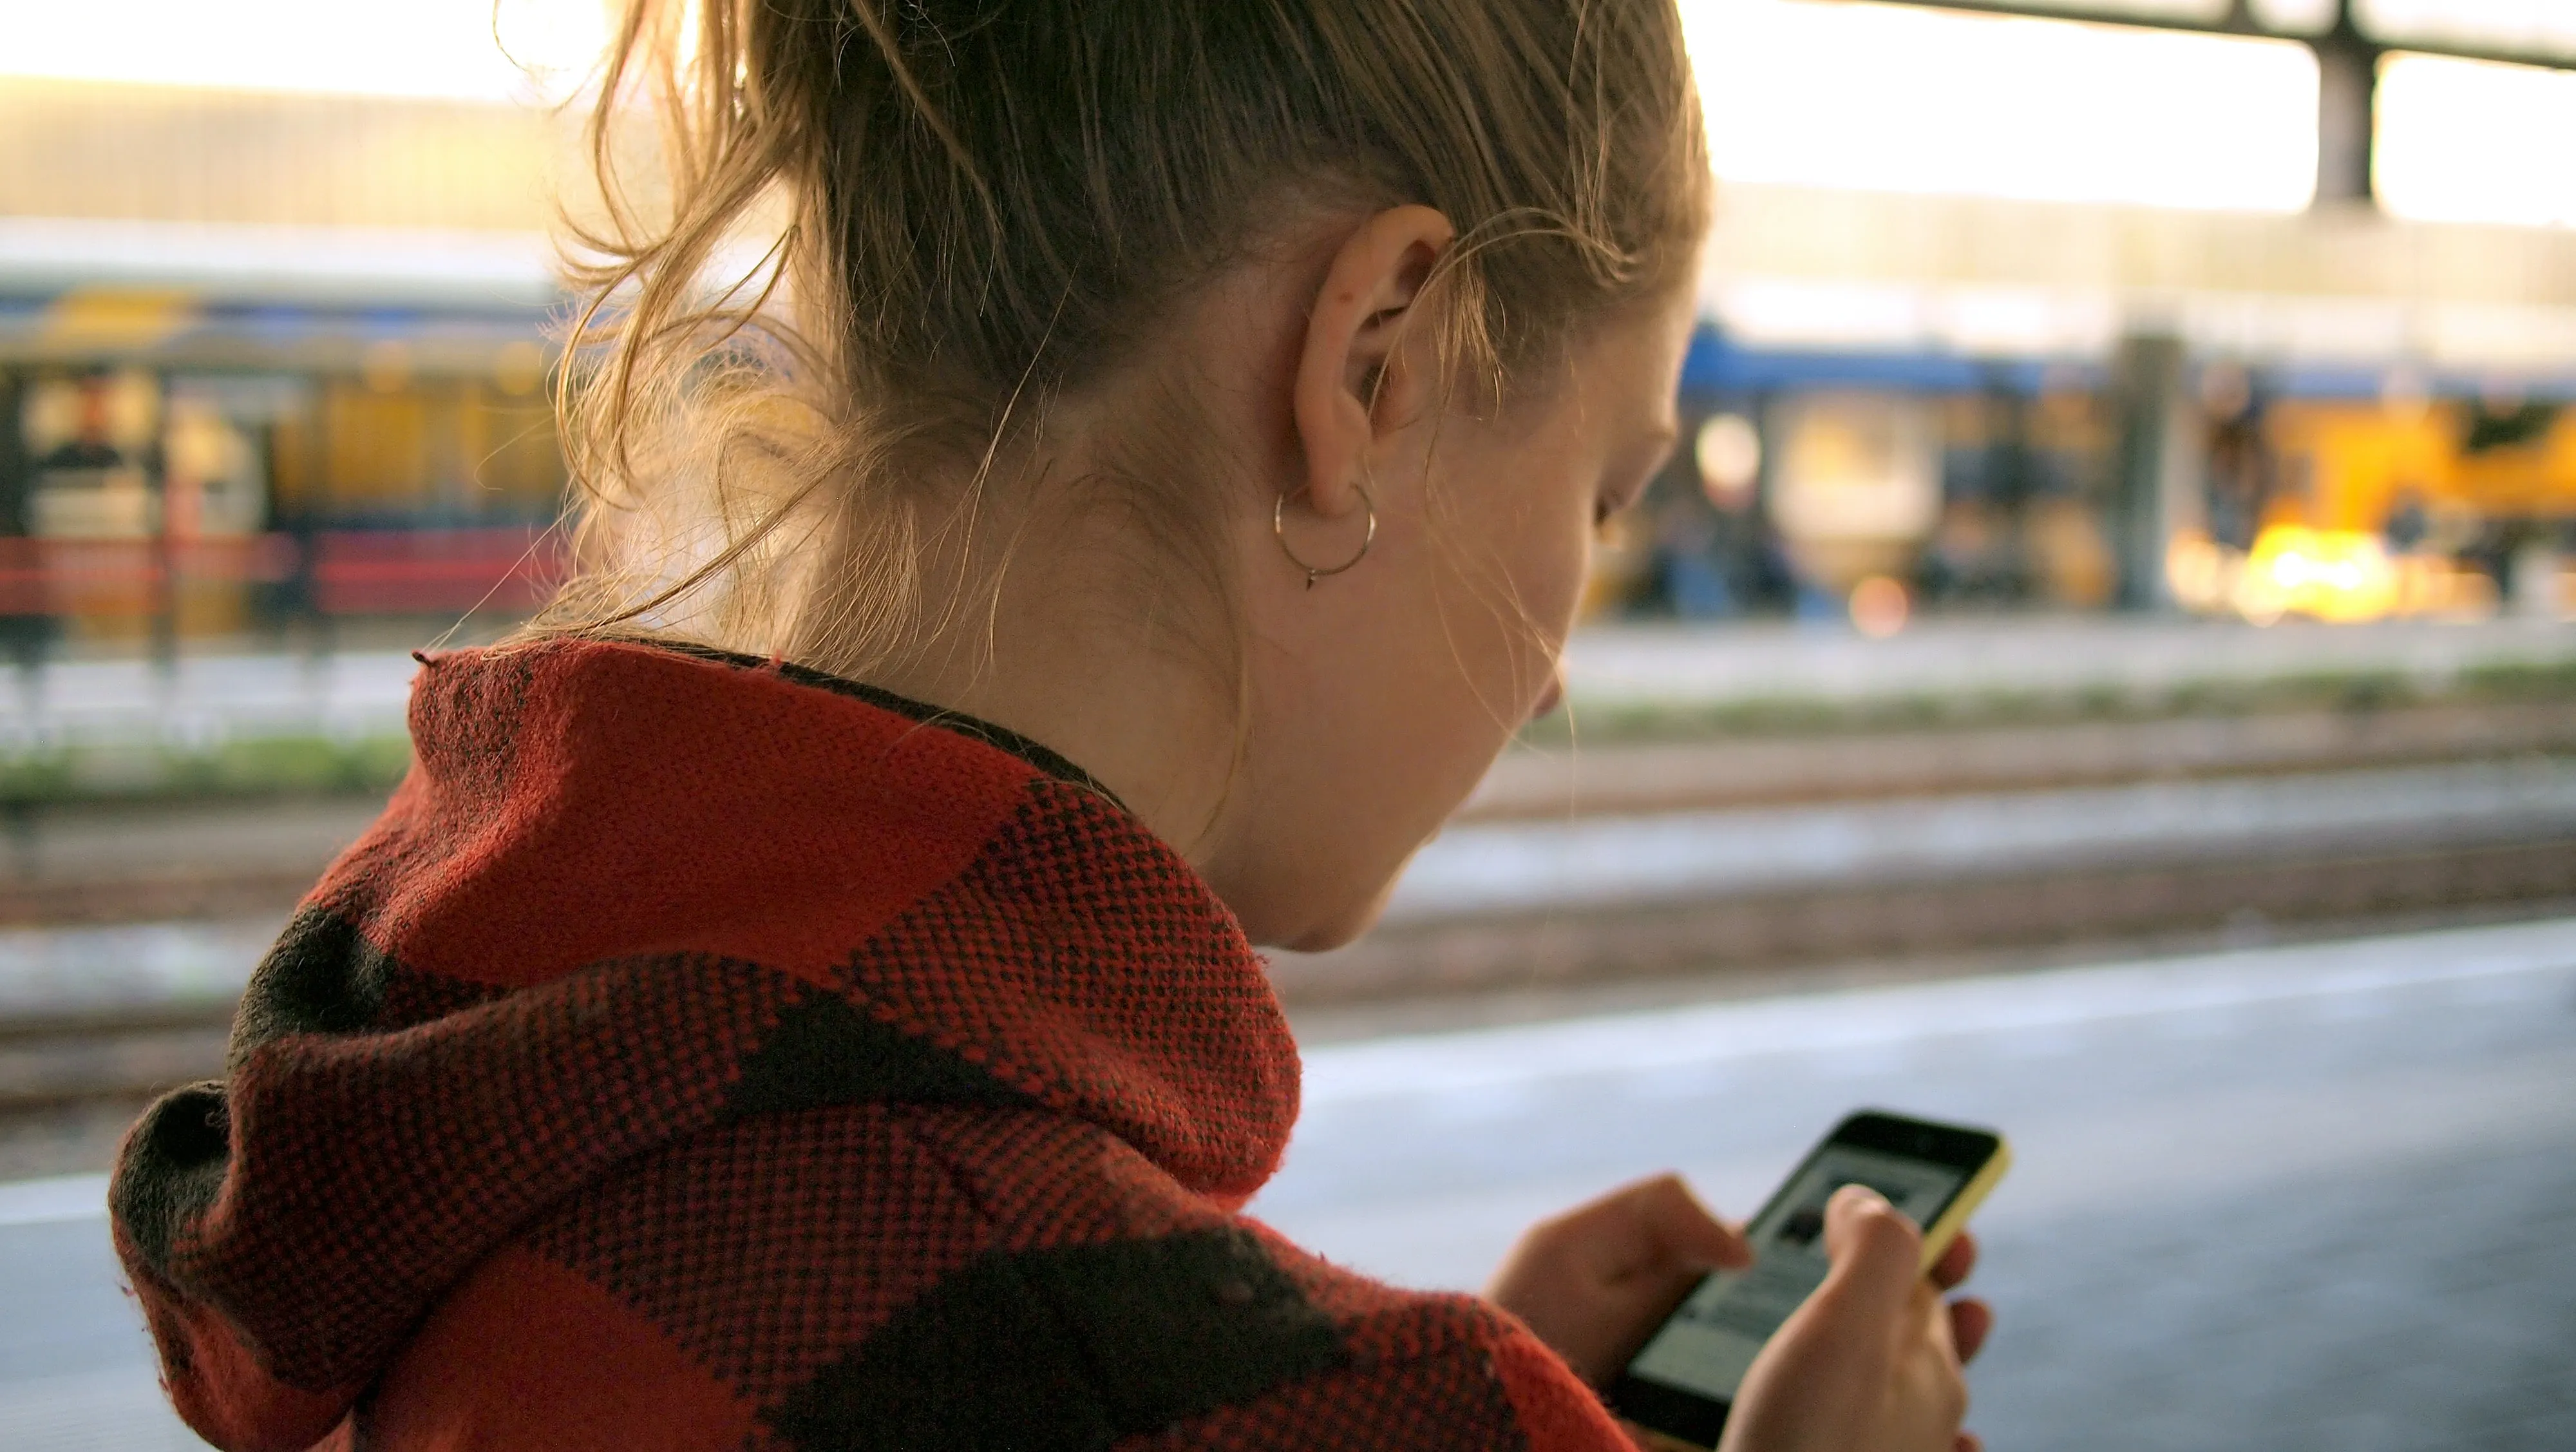 Getting started with screen readers: Woman using her phone, wearing a red jacket at a train station